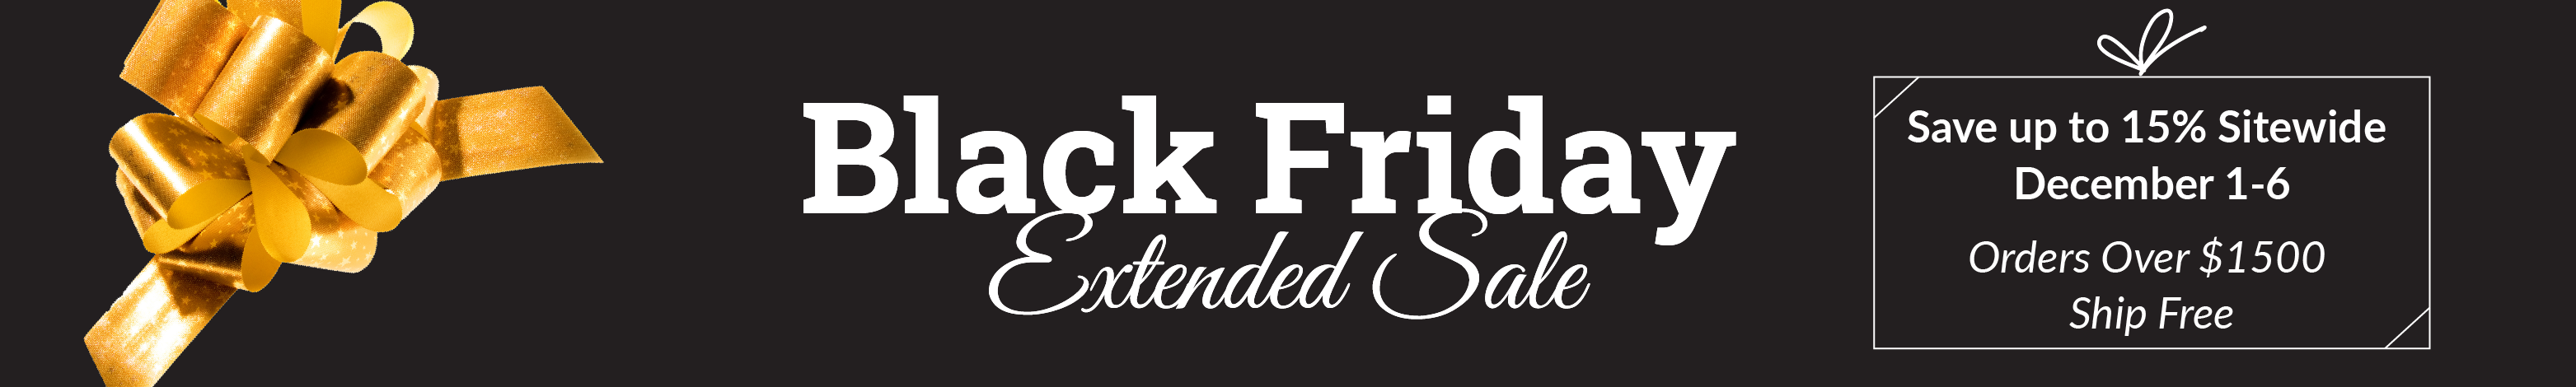 Black Friday Extended Sale